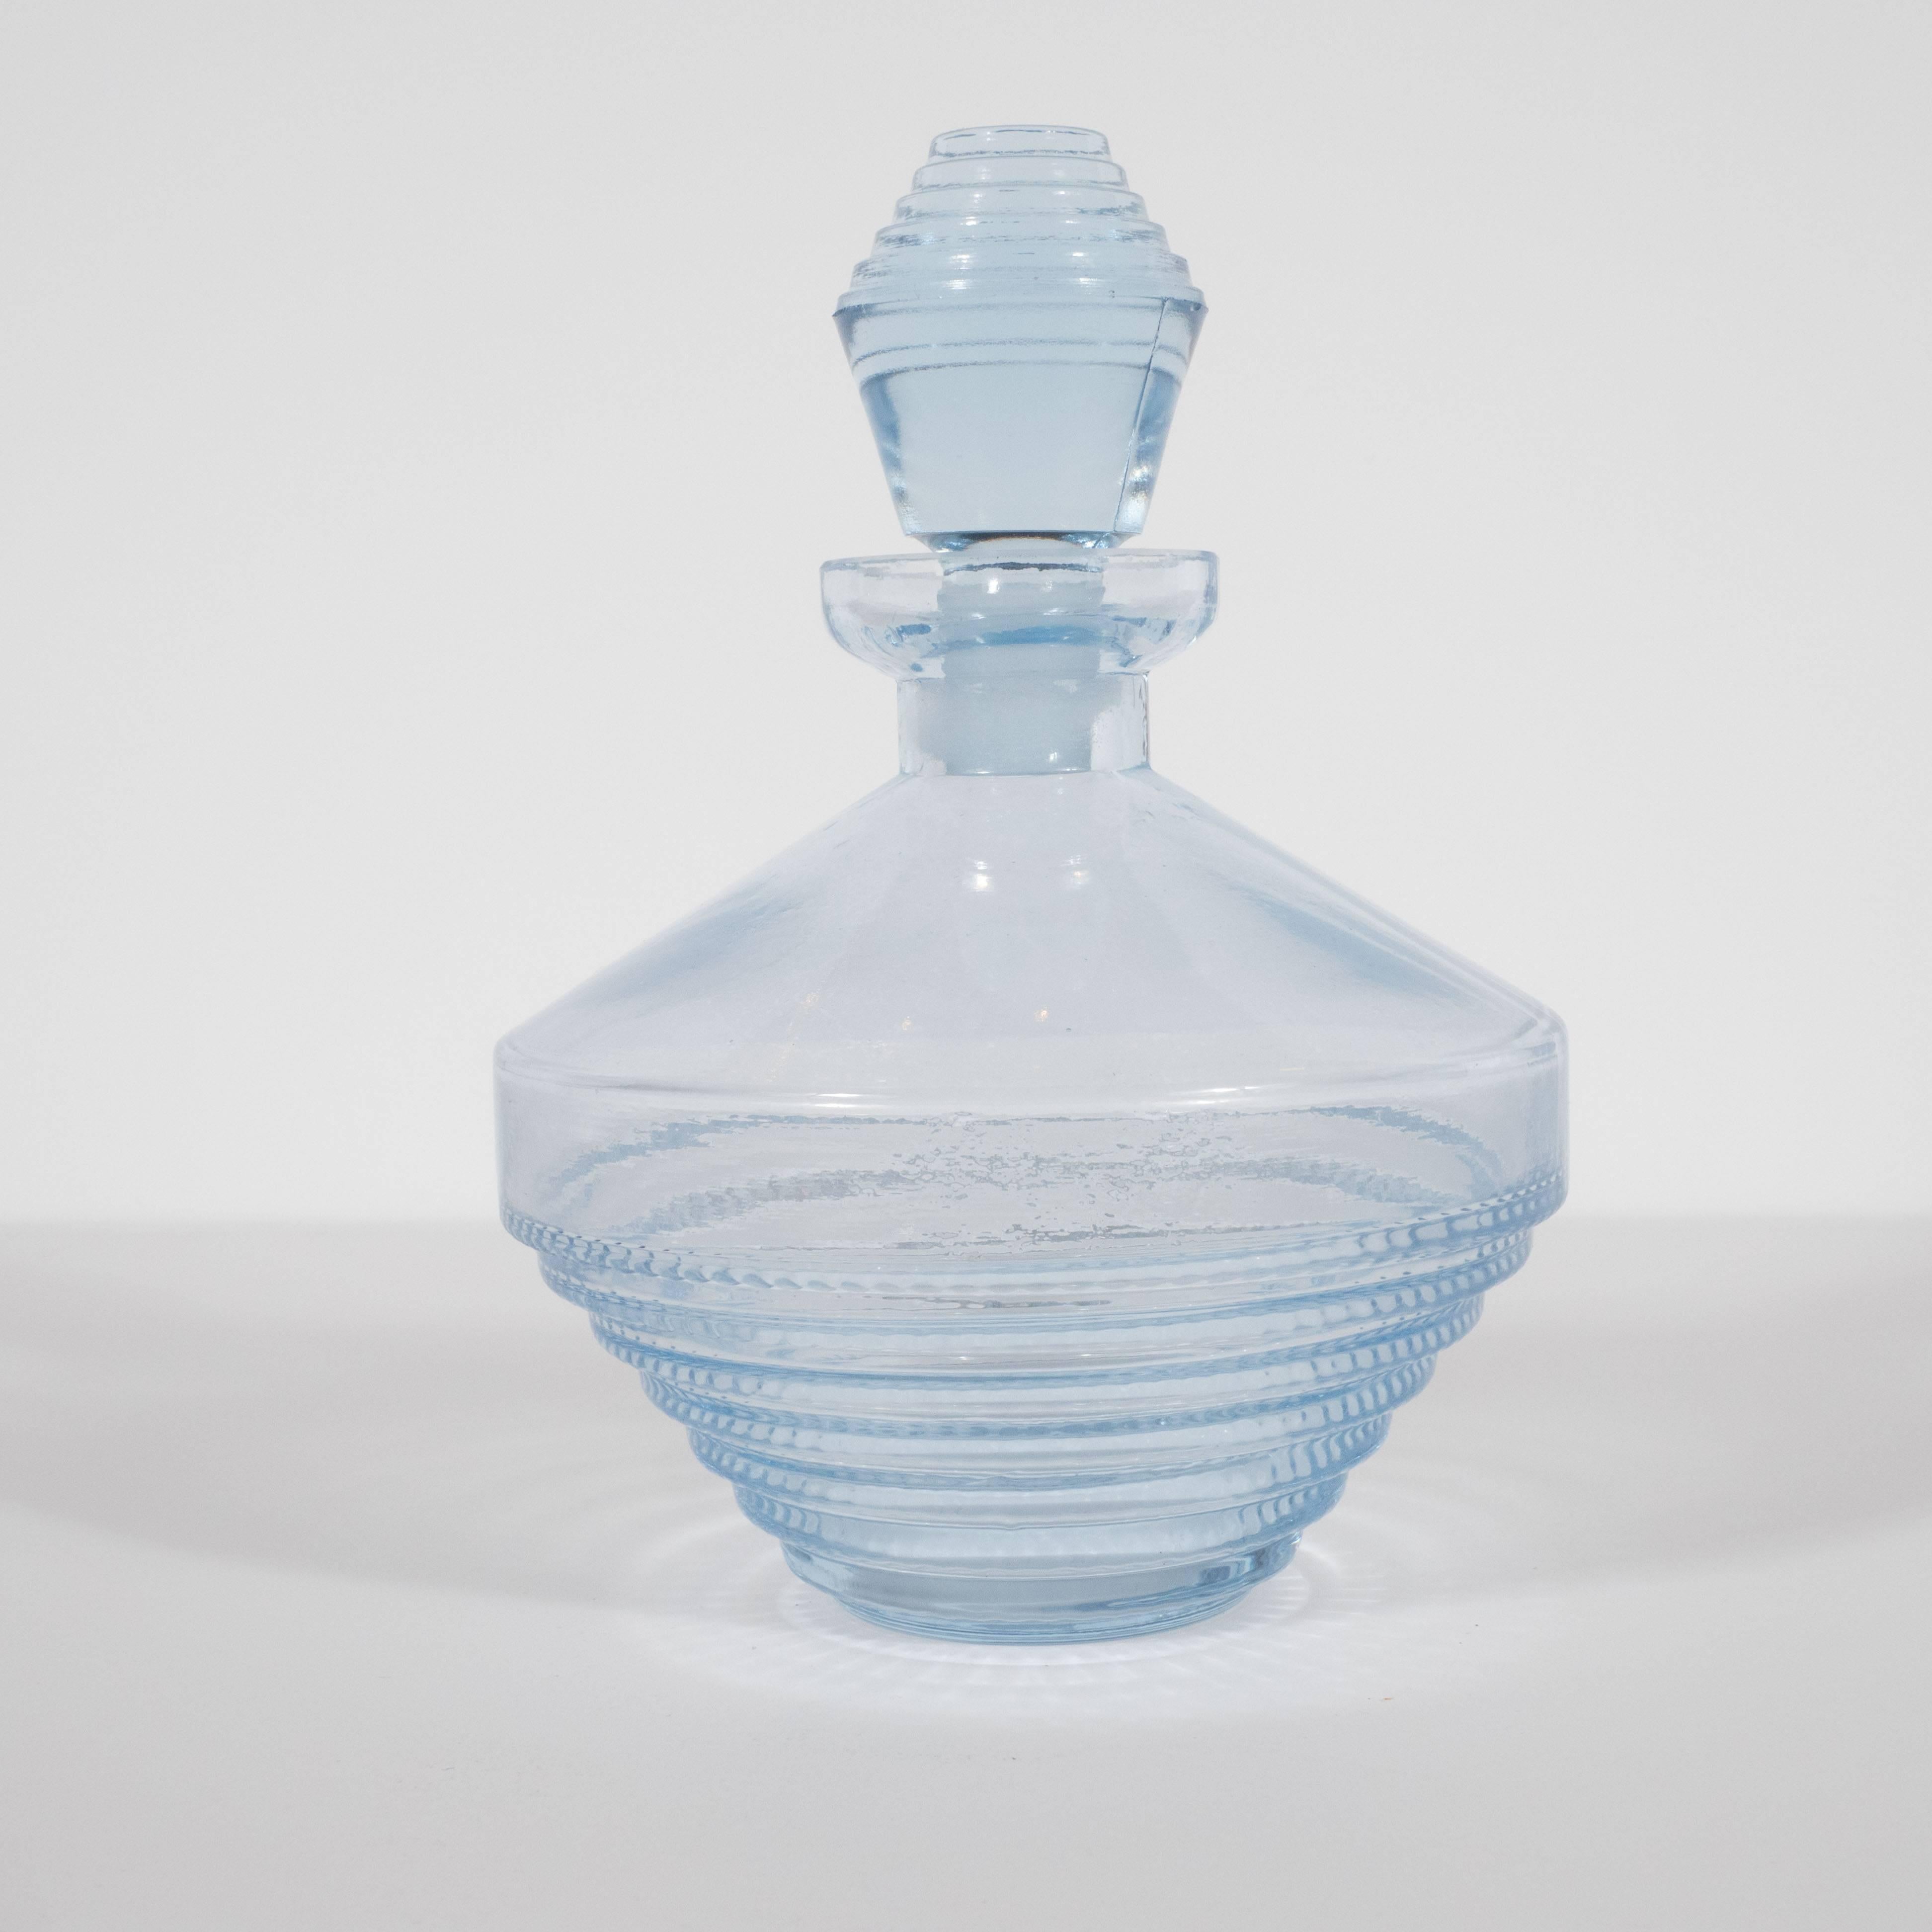 This lovely cornflower blue perfume bottle features a skyscraper style base consisting of graduating tiers of stepped glass with a subtle rippled pattern on the bottom of each tier. They culminate in a central band that circumscribes the centre of